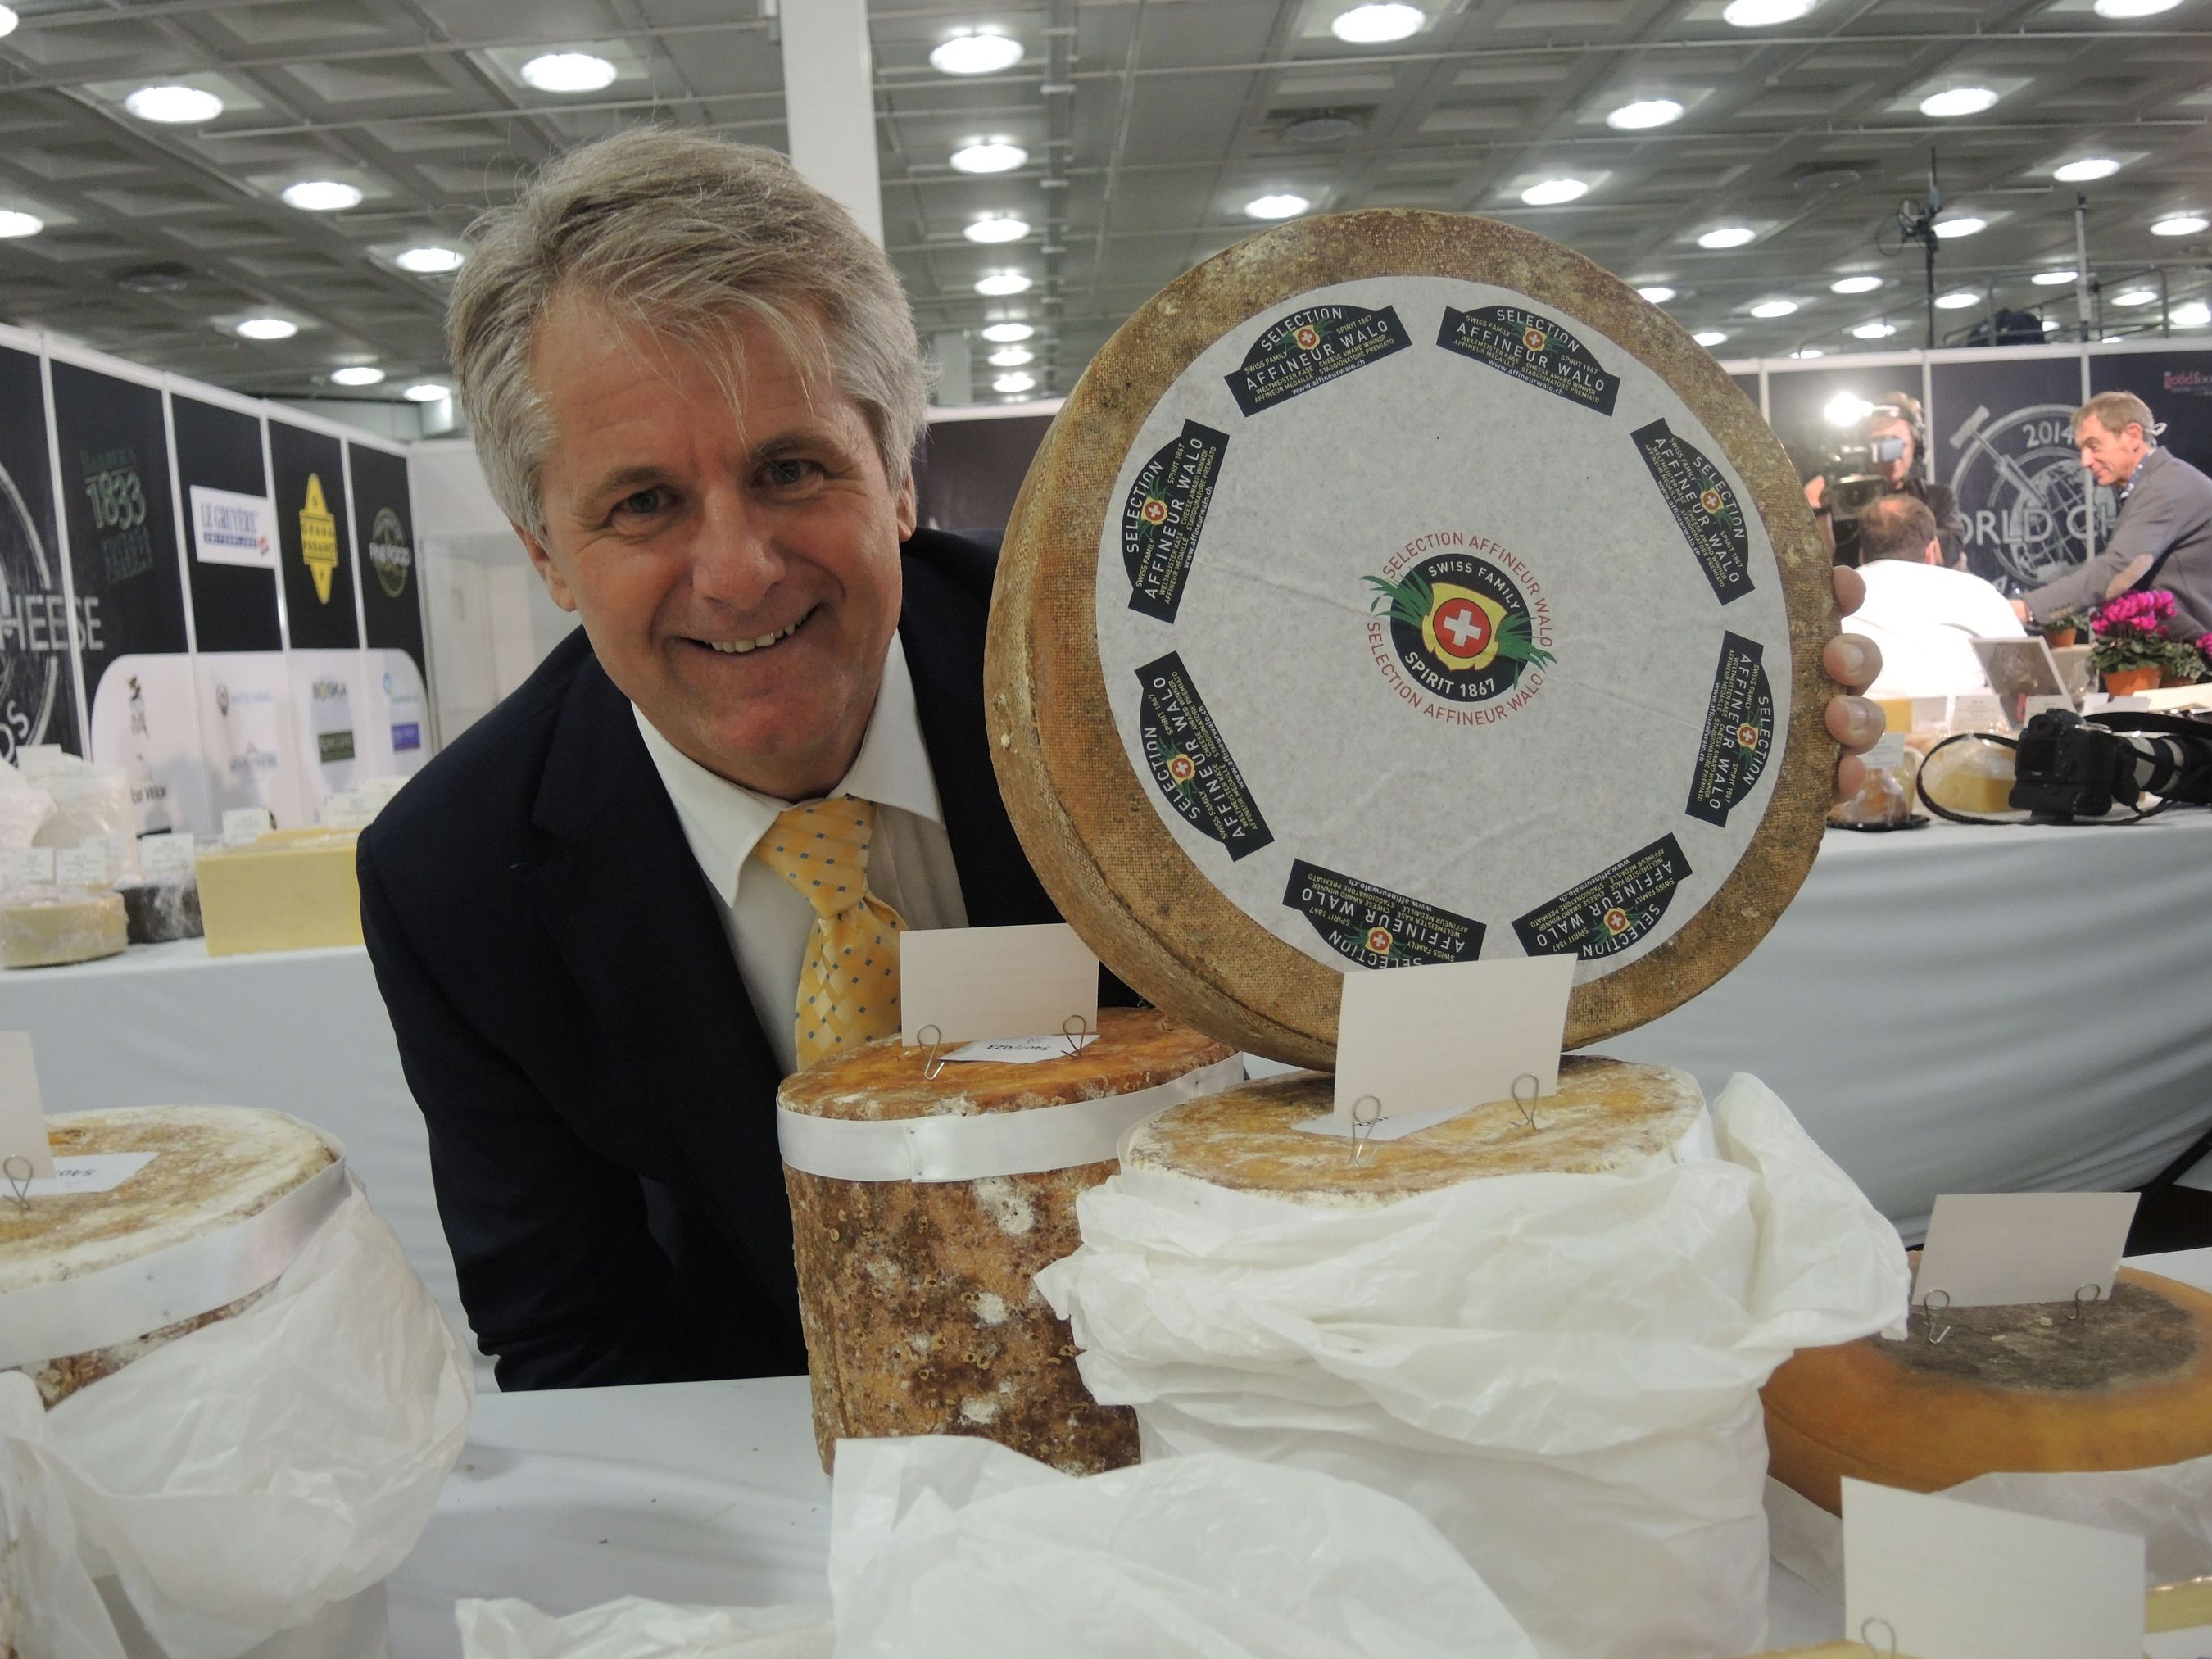 Affineur Walo von Muhlenen and his award winning cheese at the World Cheese Awards 2014 London, GB. (PRNewsFoto/Affineur Walo von Muhlenen)